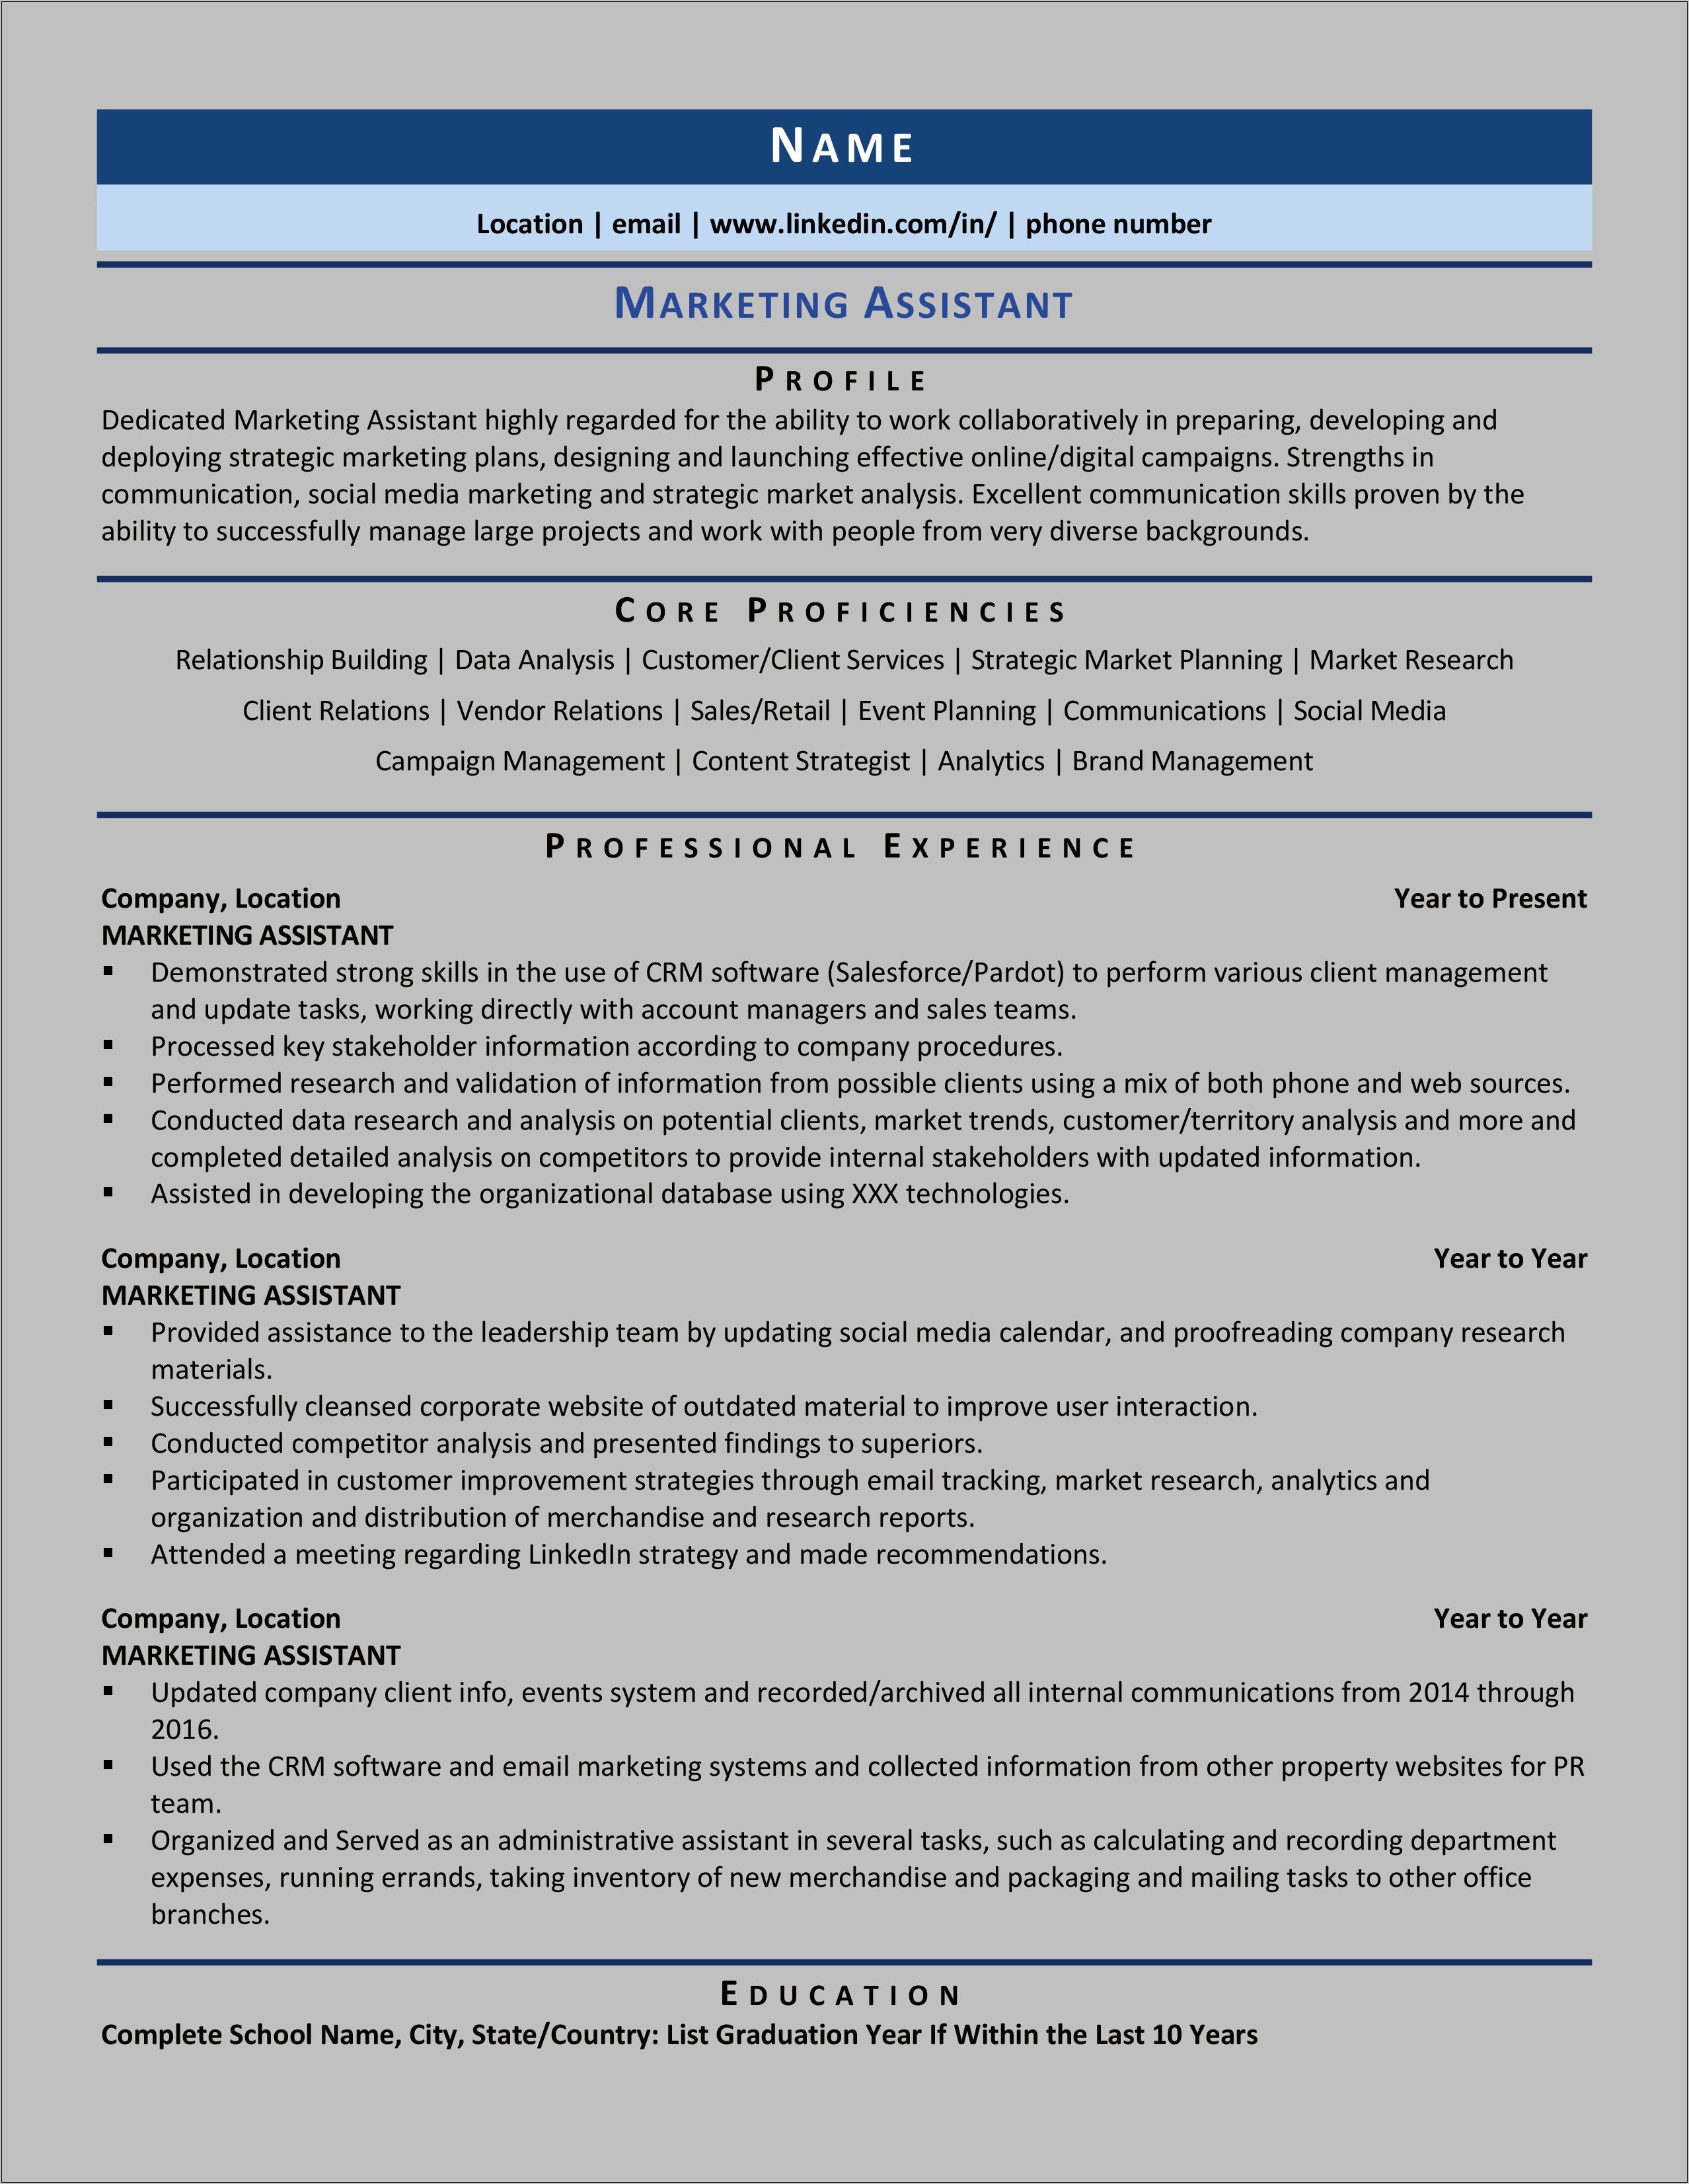 Resume Line For Working With Other People